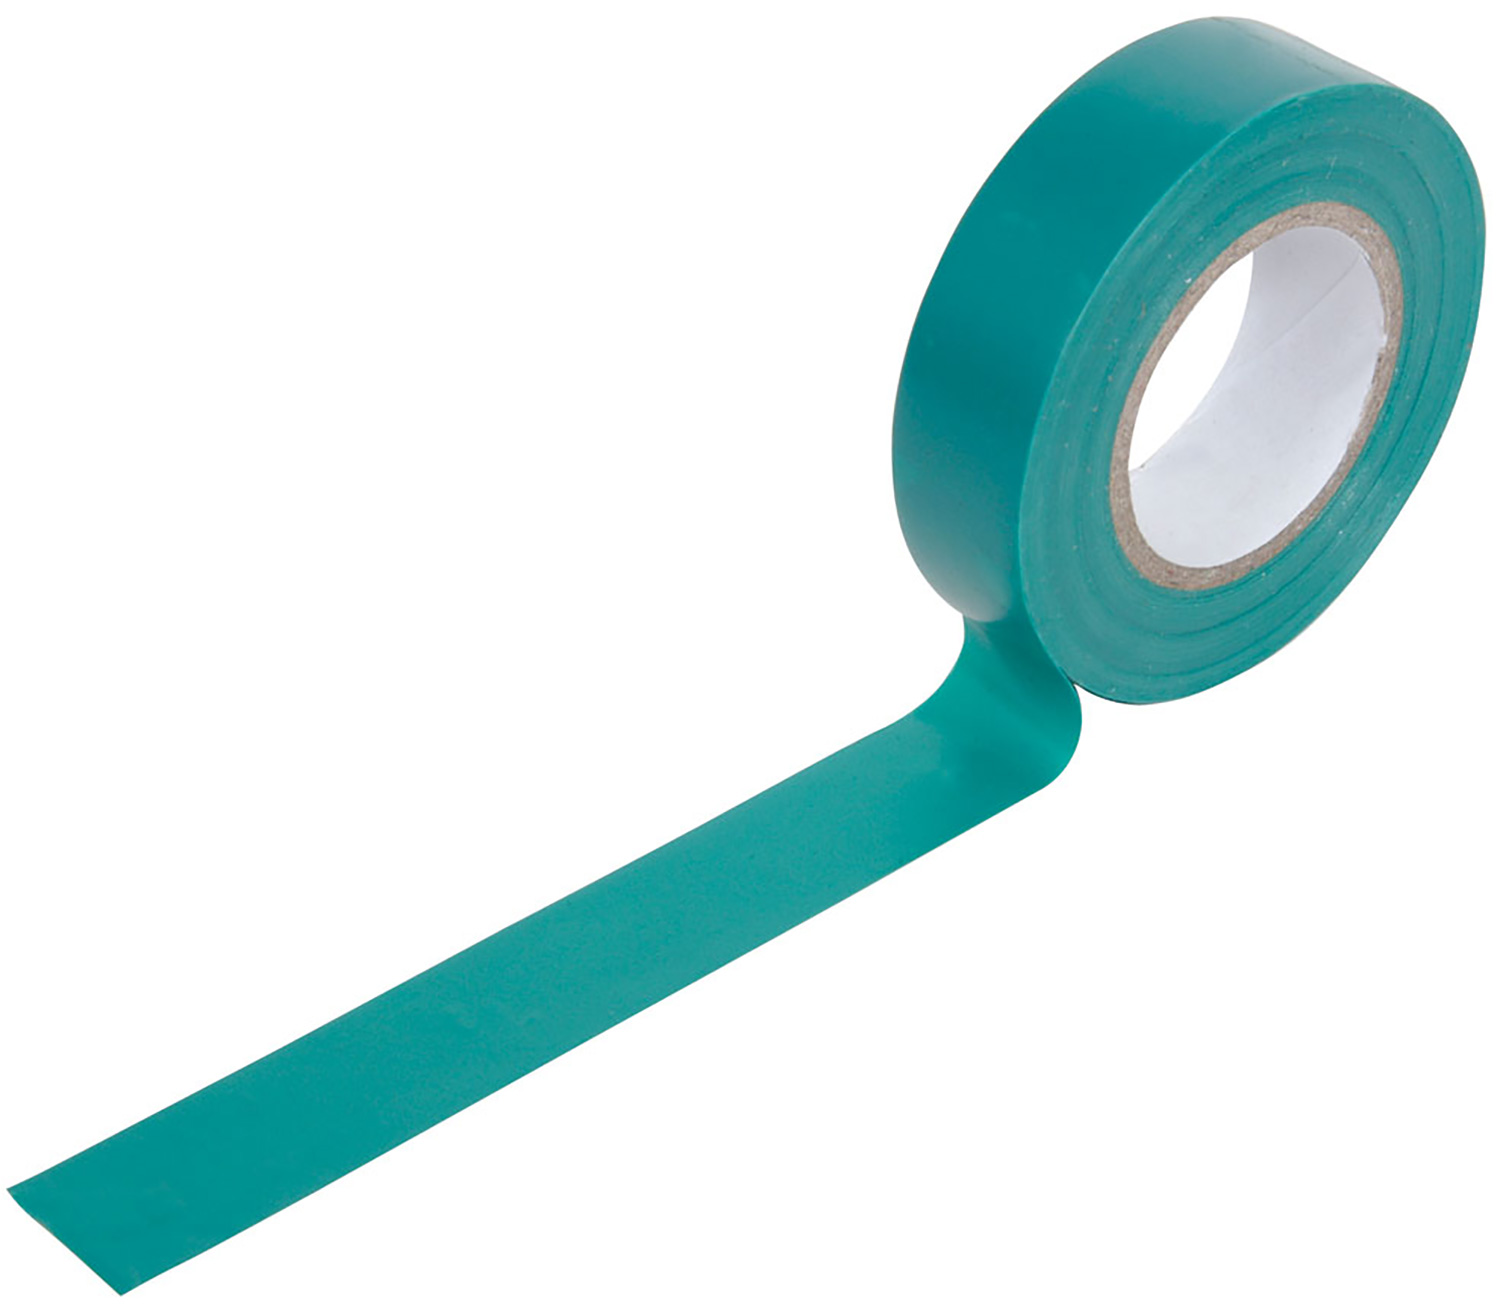 Insulation Tape - 19mm x 20m PVC20GN Electrical insulation tape, 20m, green